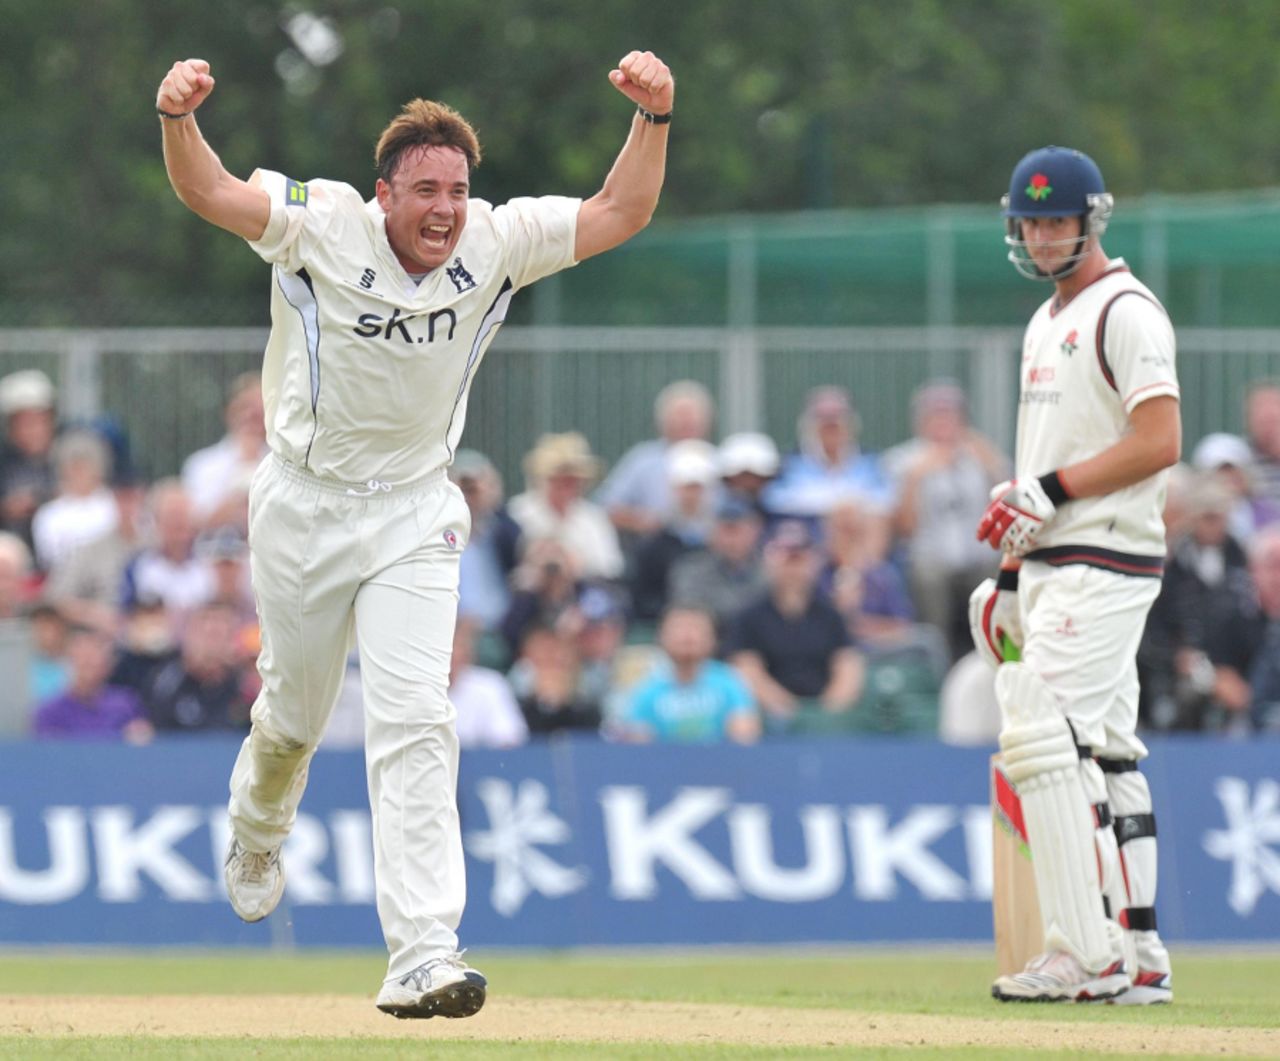 Neil Carter celebrates one of six wickets against Lancashire, Lancashire v Warwickshire, County Championship Divison One, Aigburth, August 1 2011